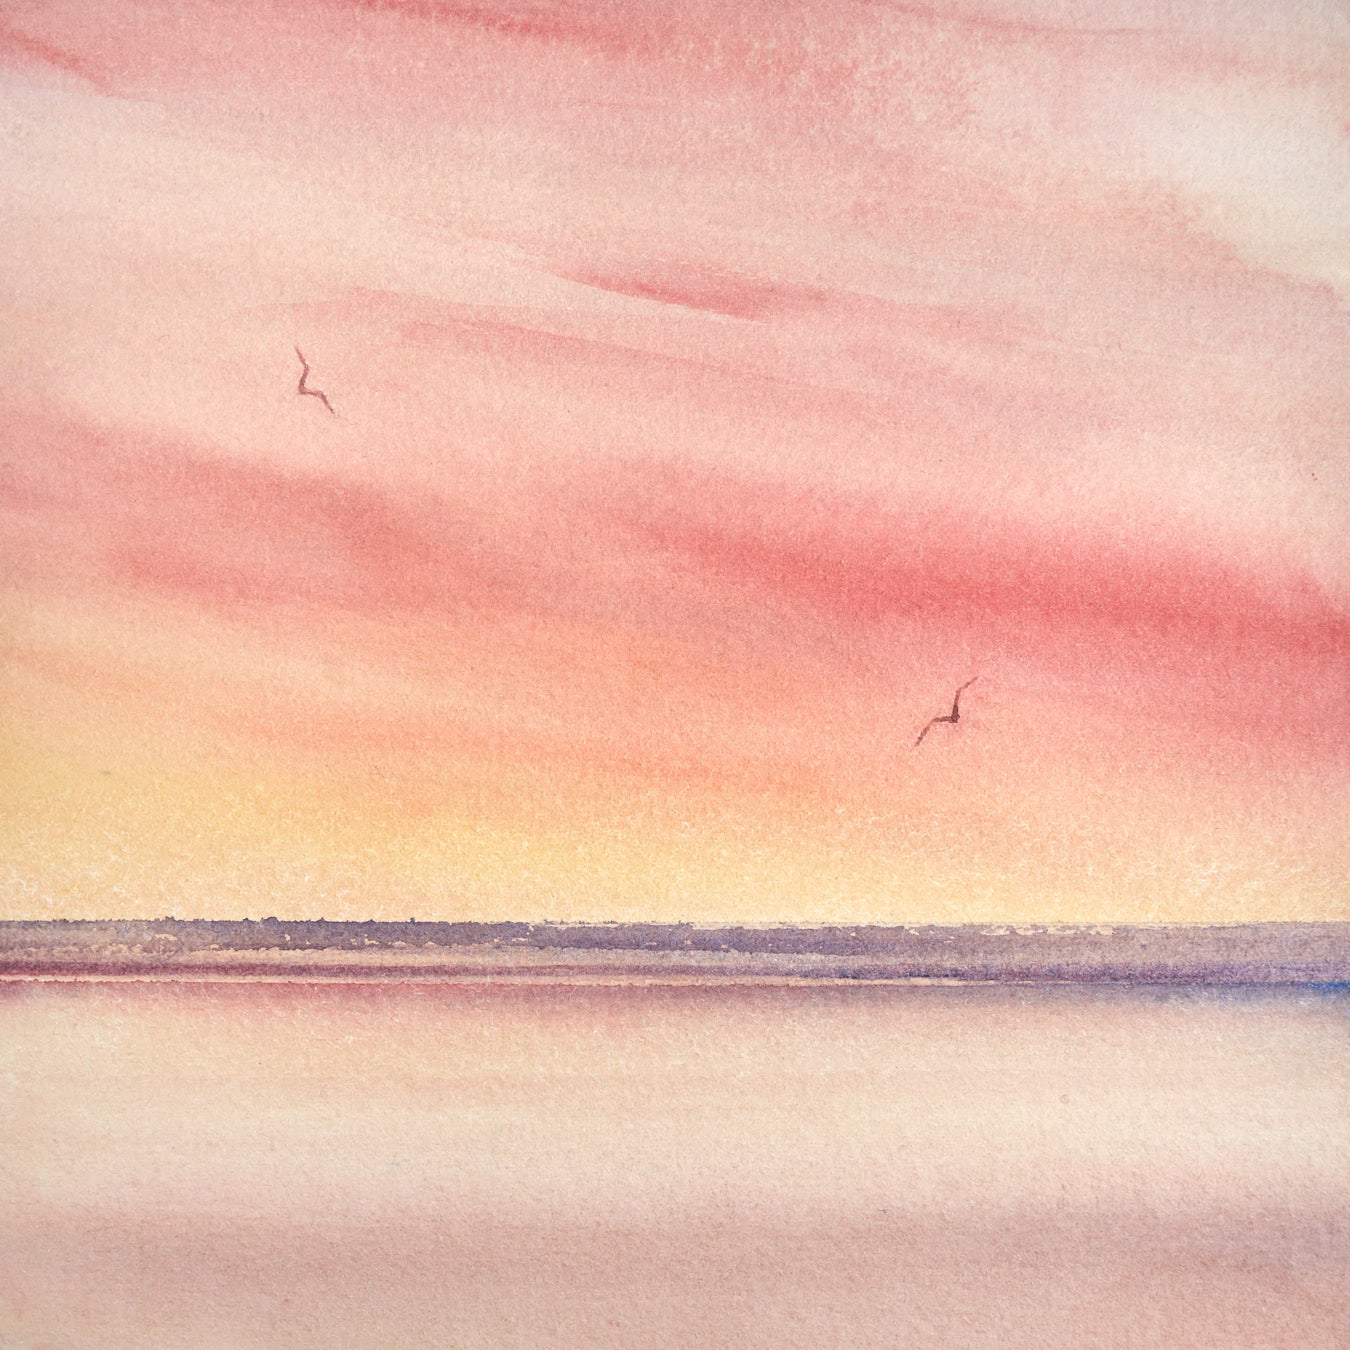 Large image of Sunset shore, St Annes-on-sea original watercolour painting by Timothy Gent